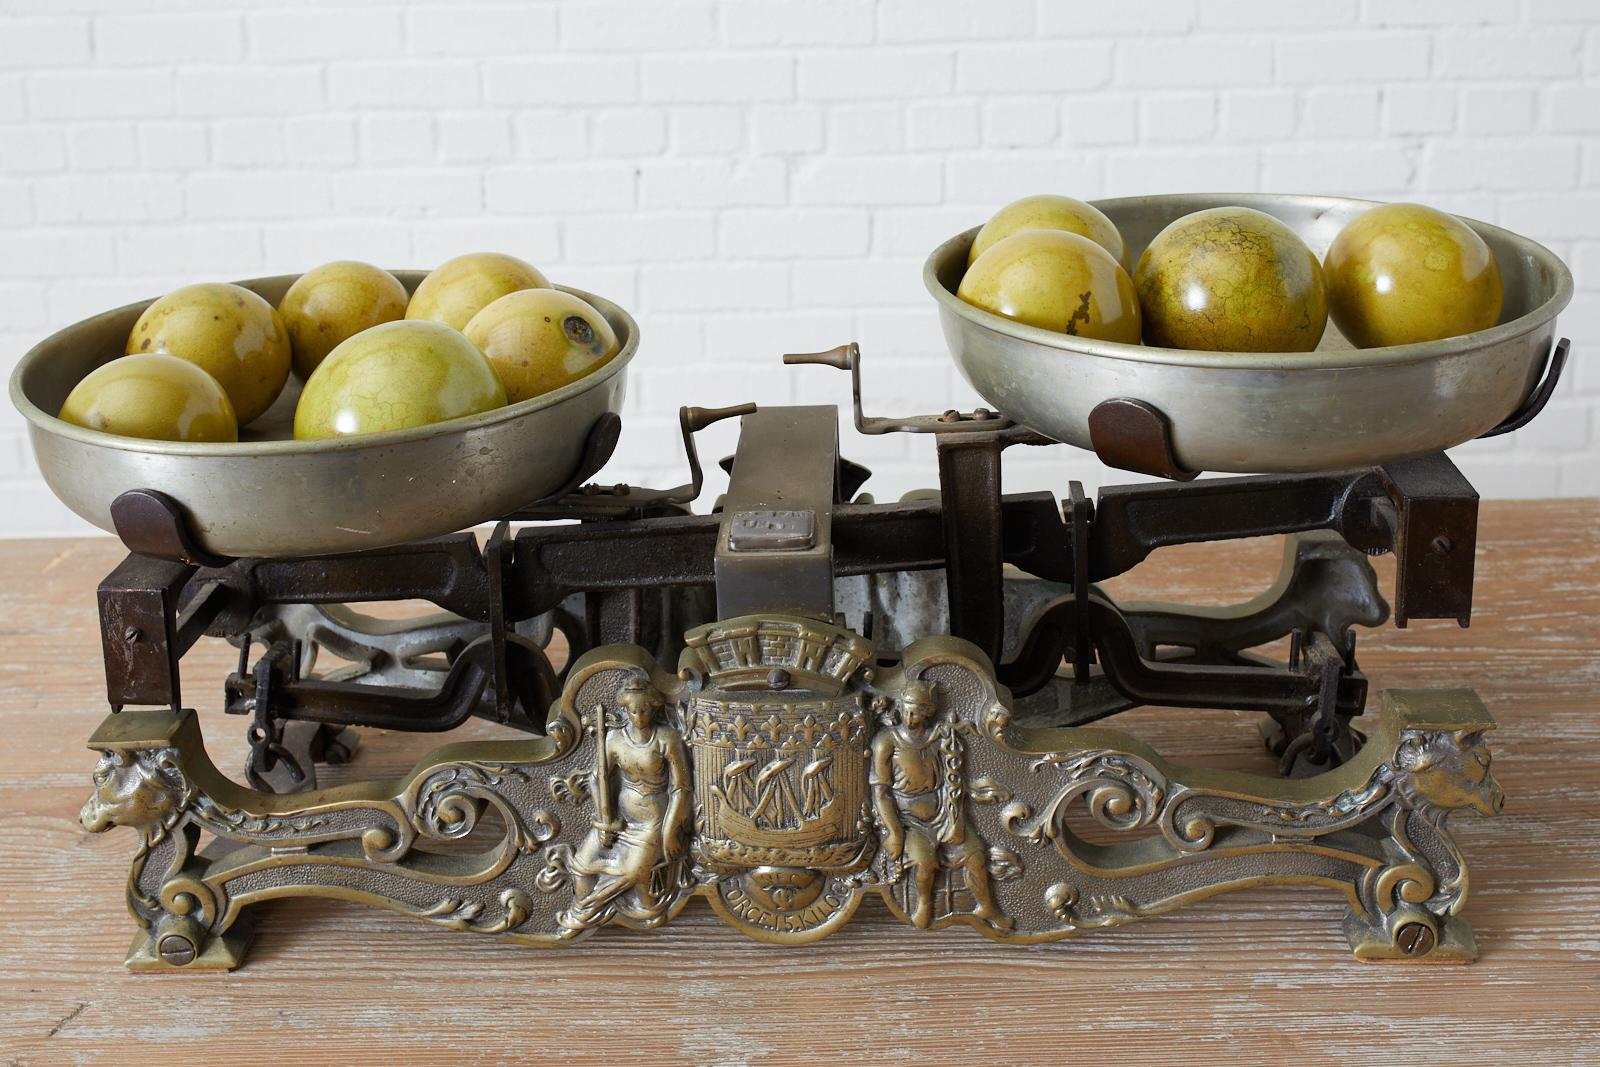 Iron and brass late 19th century French butcher or merchants scale with silver metal hand formed bowls. The large scale has impressive neoclassical motif Greek figures of brass on the front center with cows heads on each end. Heavy iron frame with